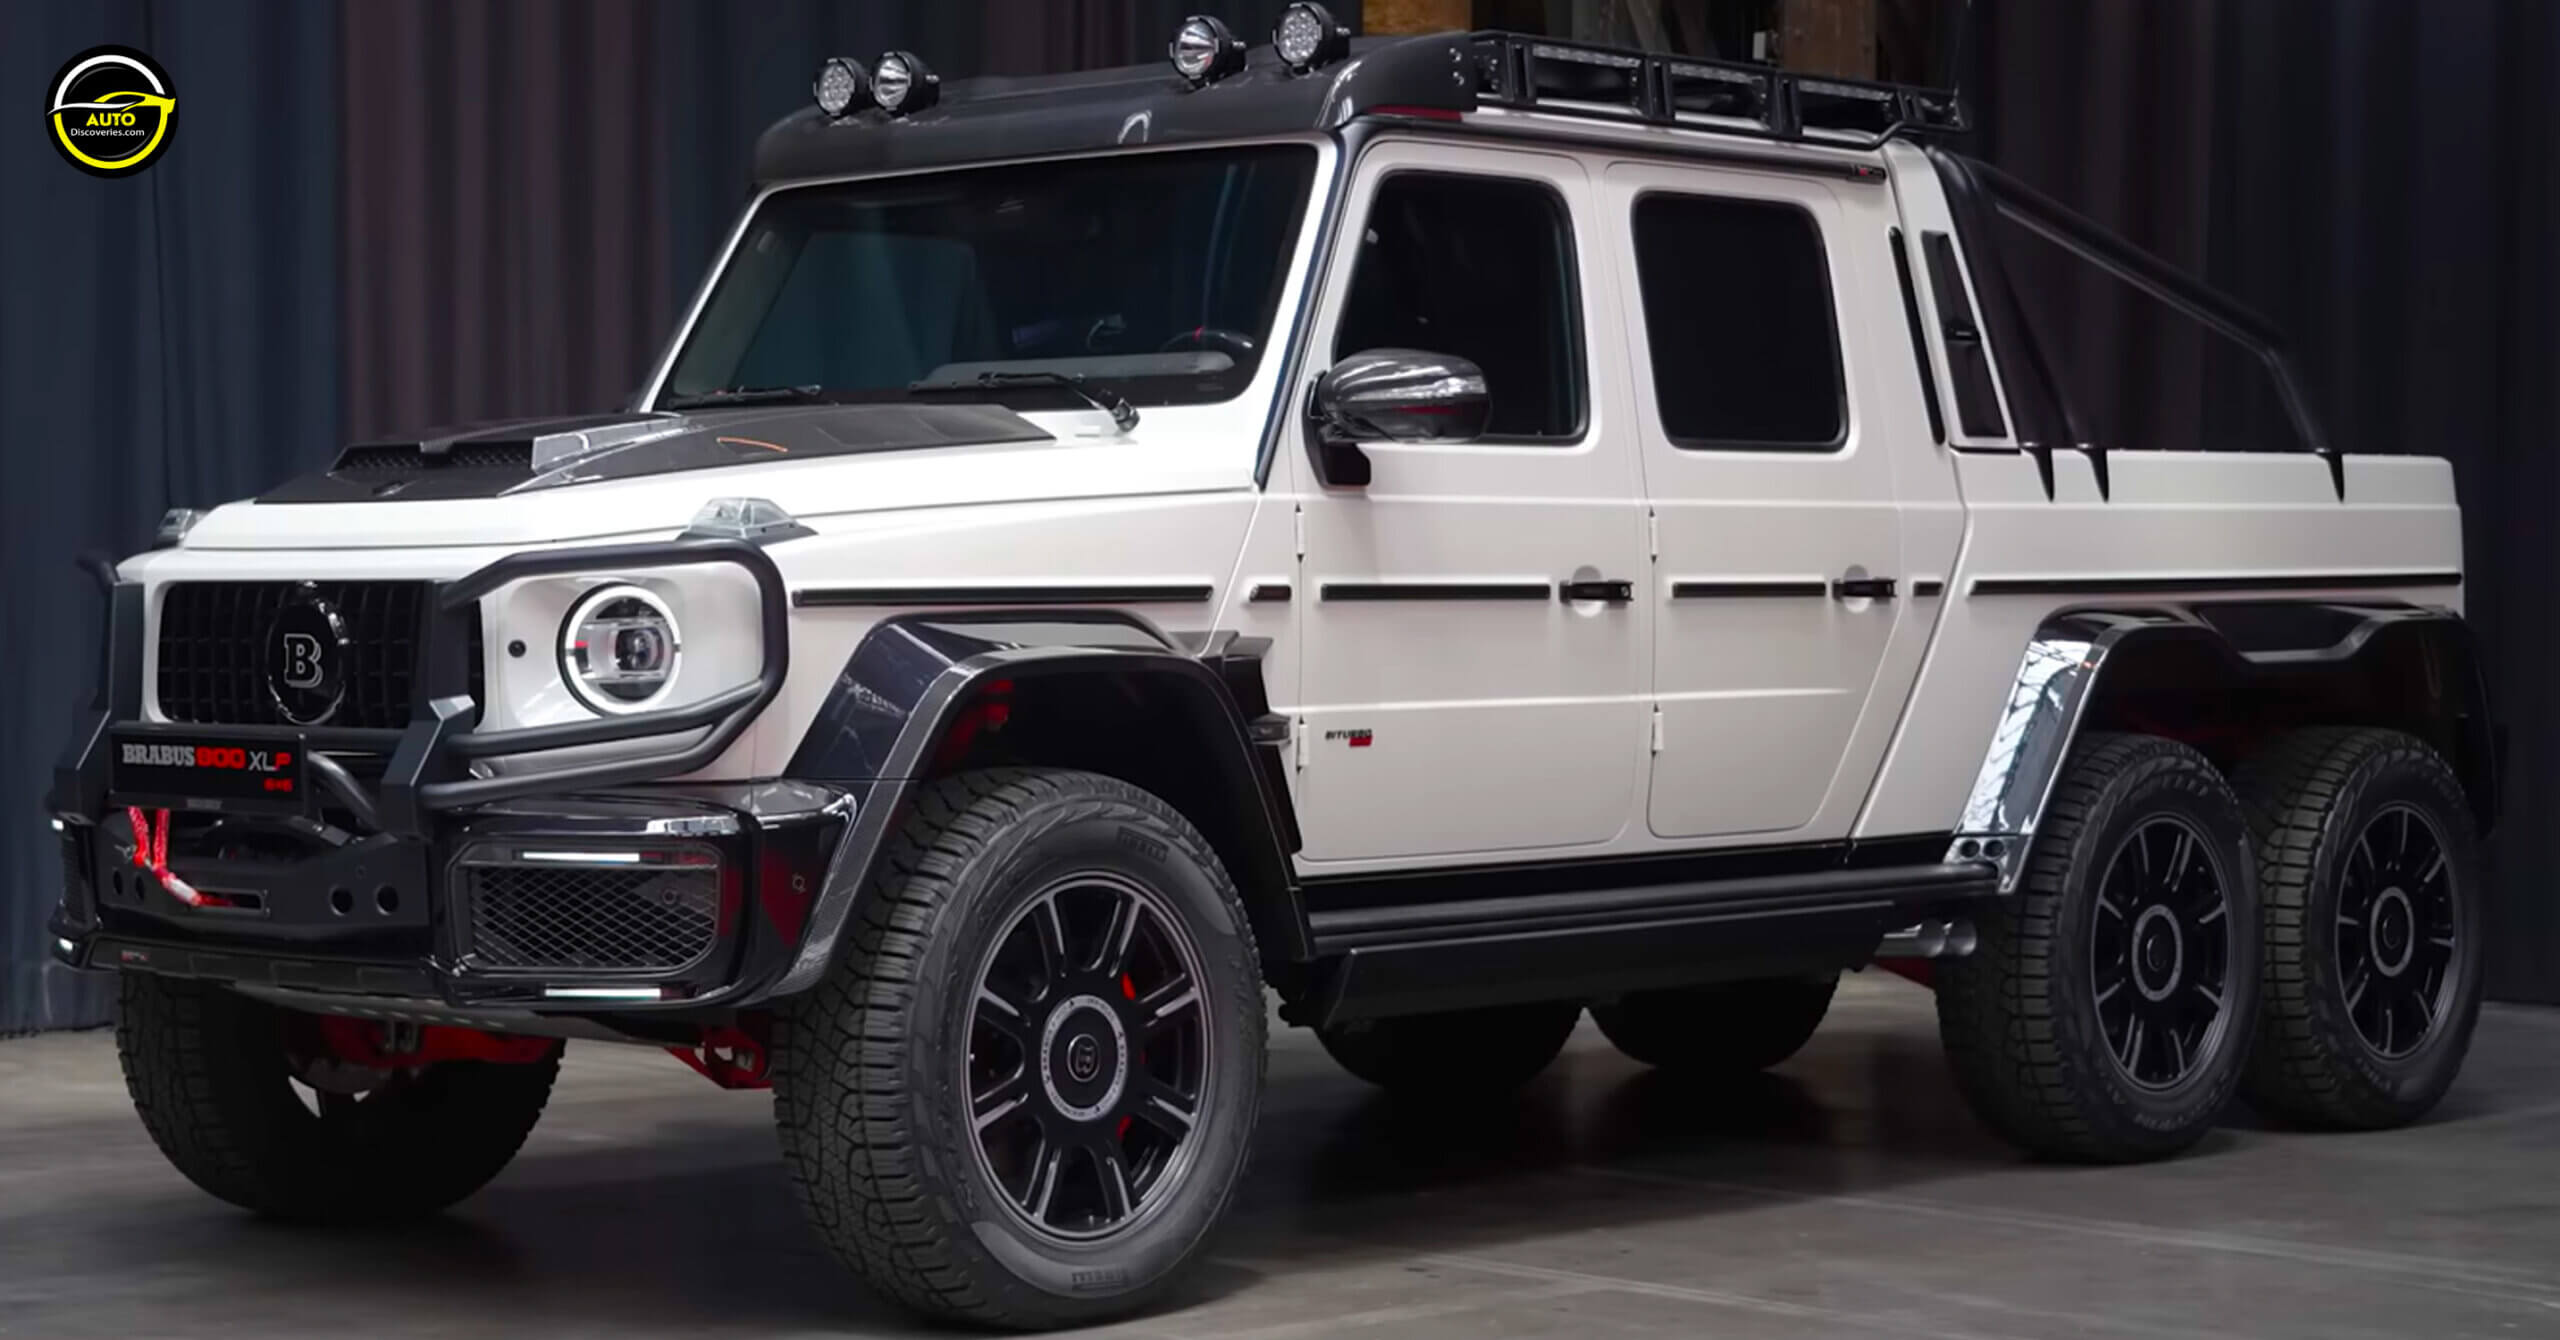 2023 Brabus G63 6x6 G900: The $1.5M Off-Road Beast! First look! - Auto ...